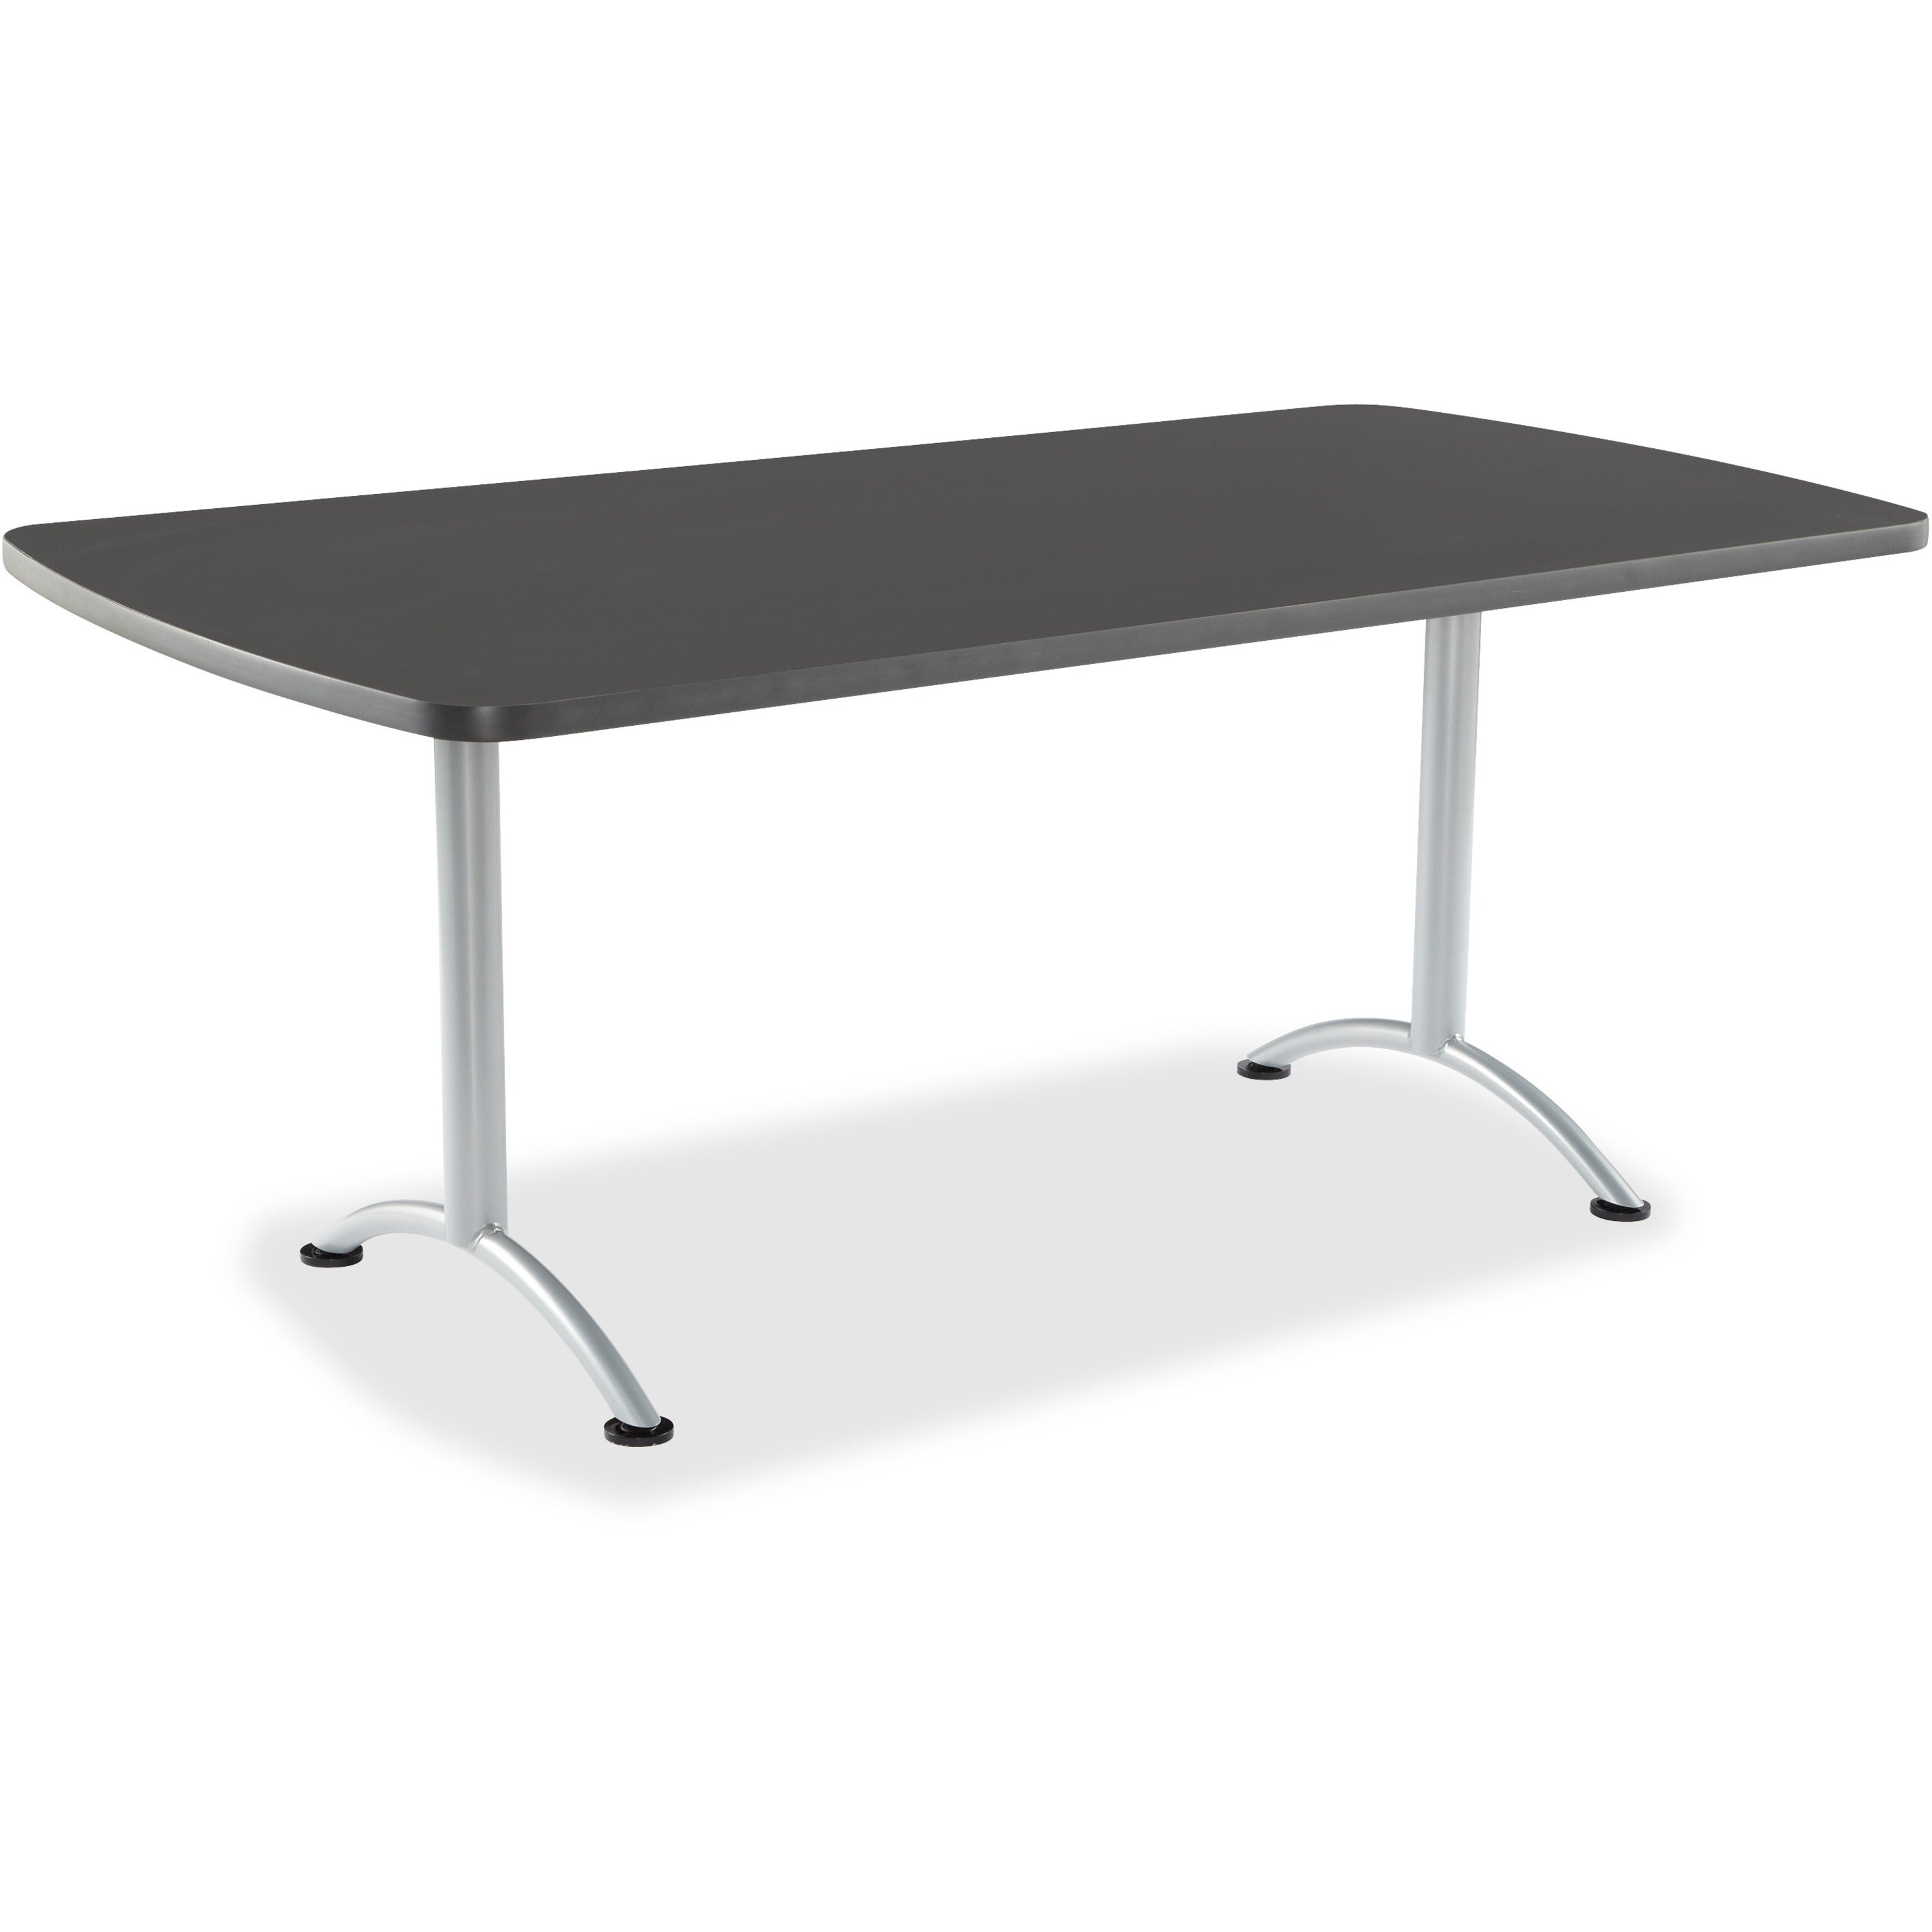 iceberg-arc-fixed-height-table-36x72-rectangular-graphite-for-table-toprectangle-top-72-table-top-length-x-36-table-top-width-assembly-required-graphite-1-each_ice69227 - 1